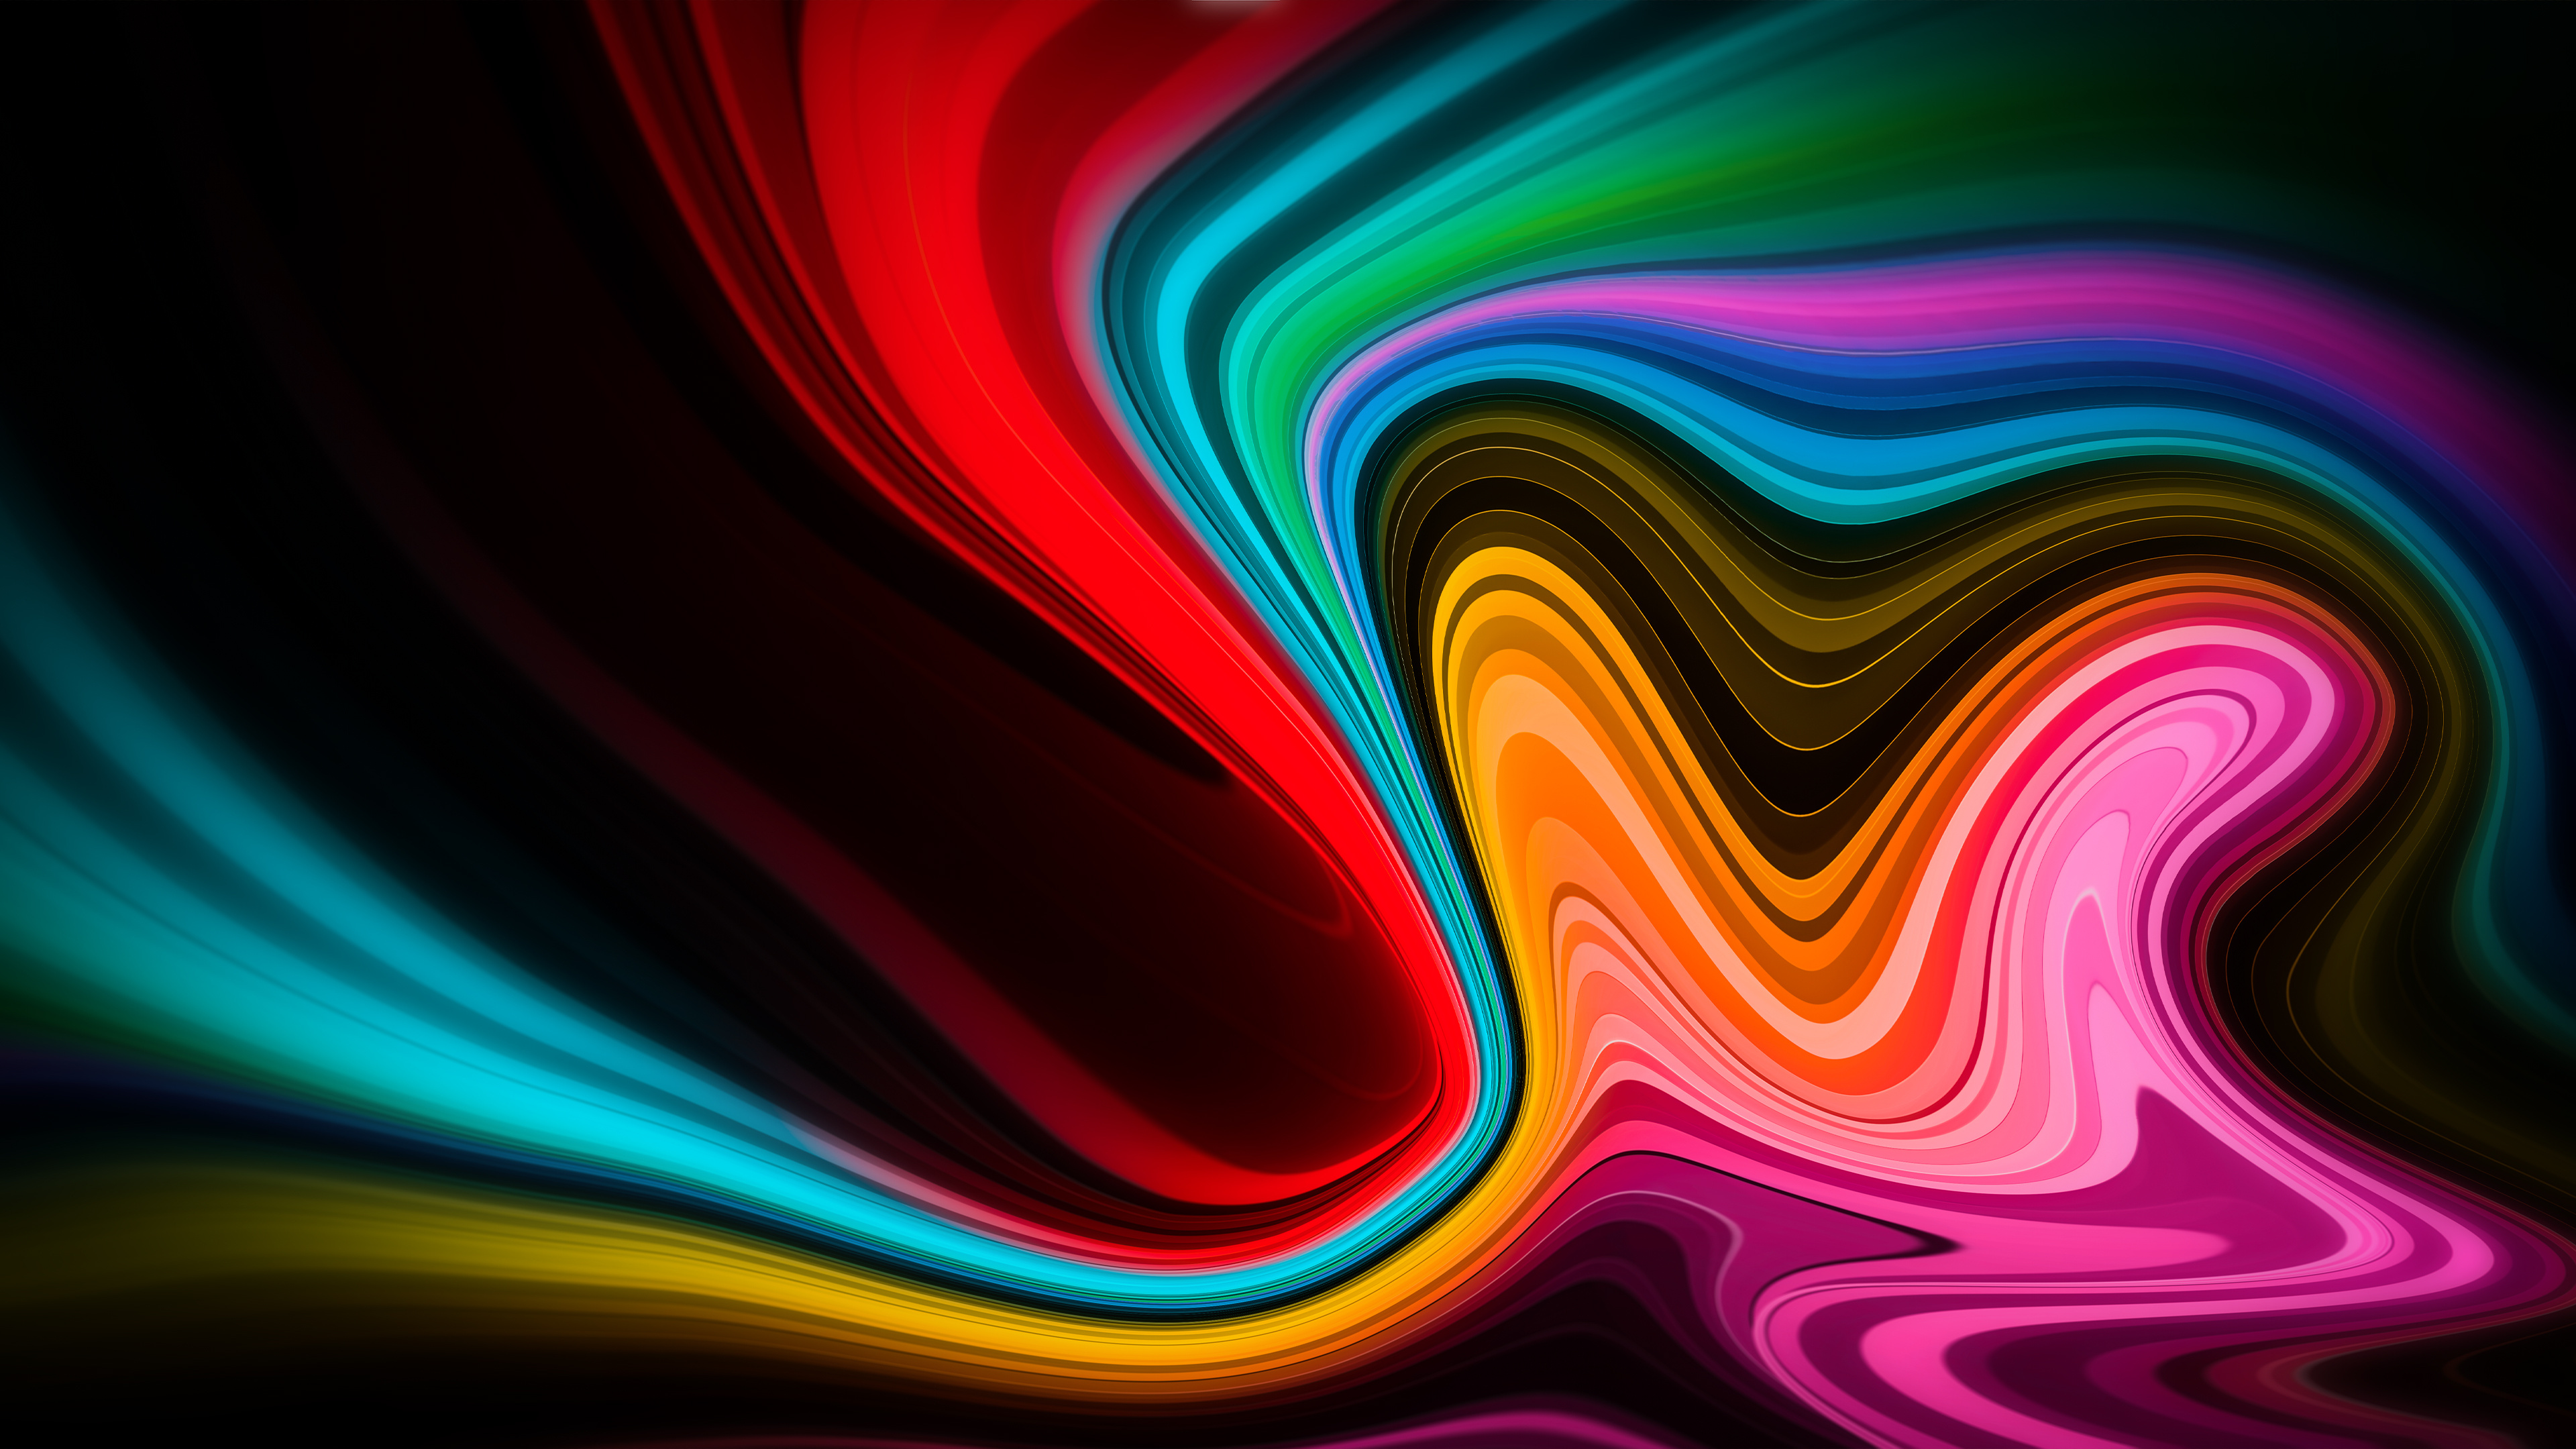 Abstract colors 4K wallpaper, High-definition and ultra HD, Colorful and vibrant, Artistic expression, 3840x2160 4K Desktop